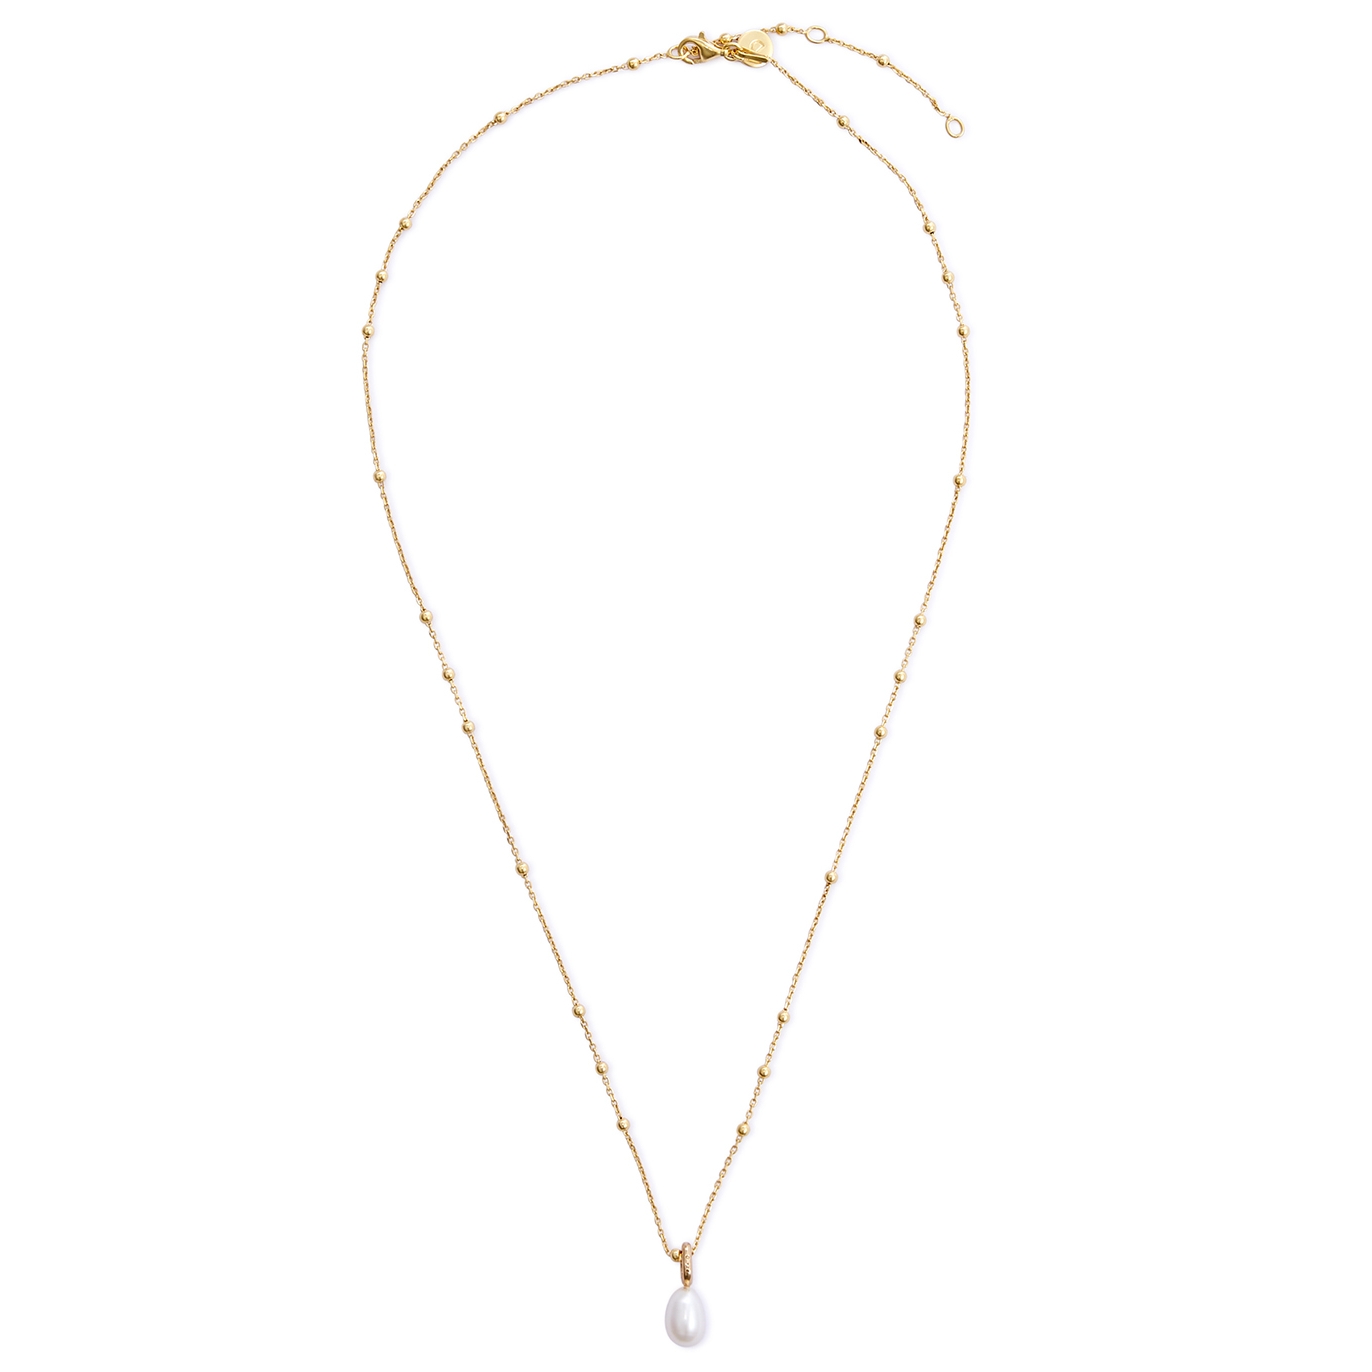 Daisy London Treasures 18kt Gold-plated Necklace